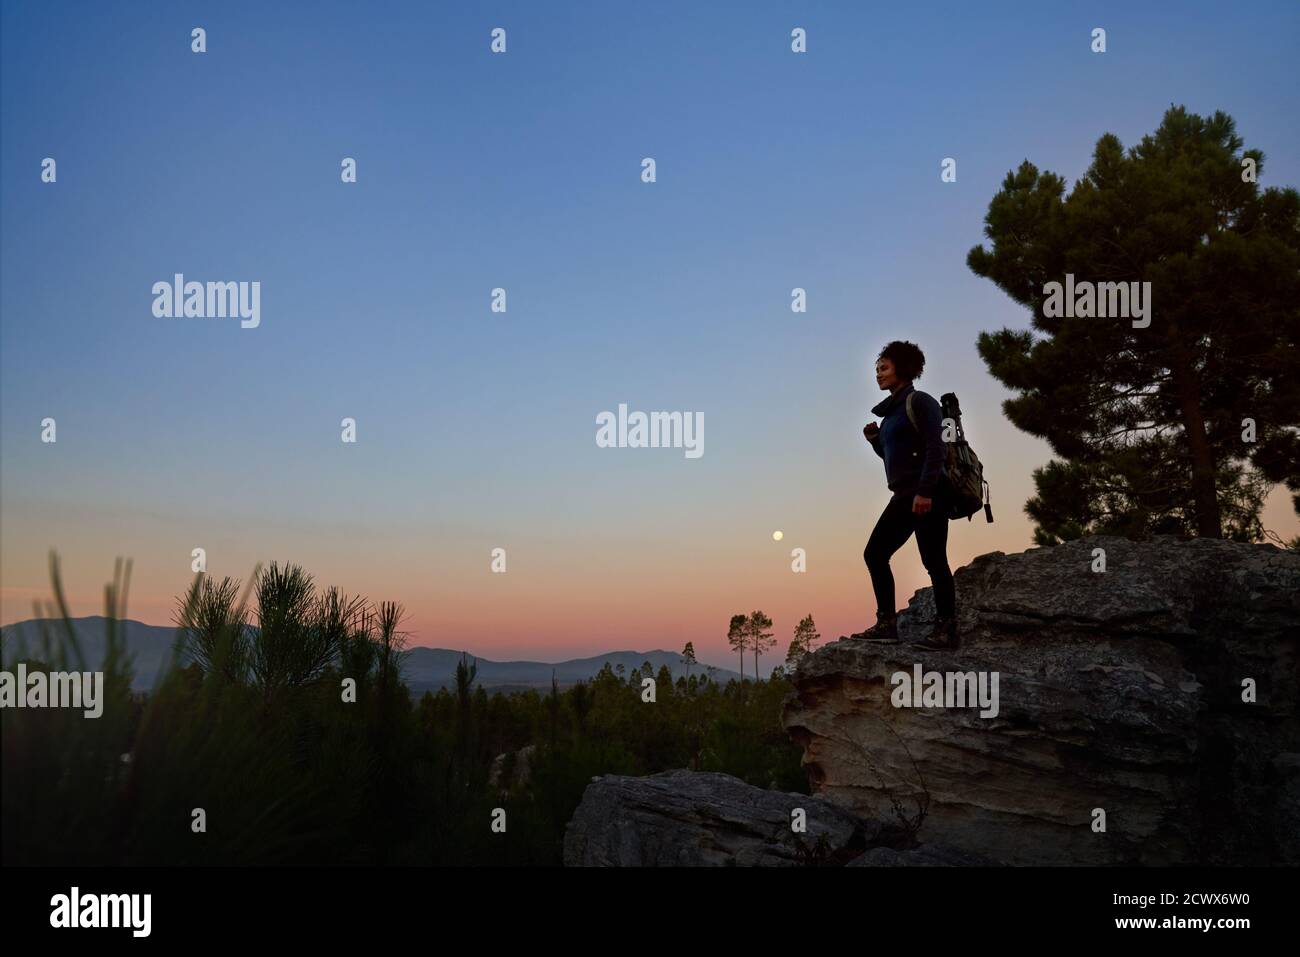 Young female hiker on rock in scenic tranquil desert at dusk Stock Photo